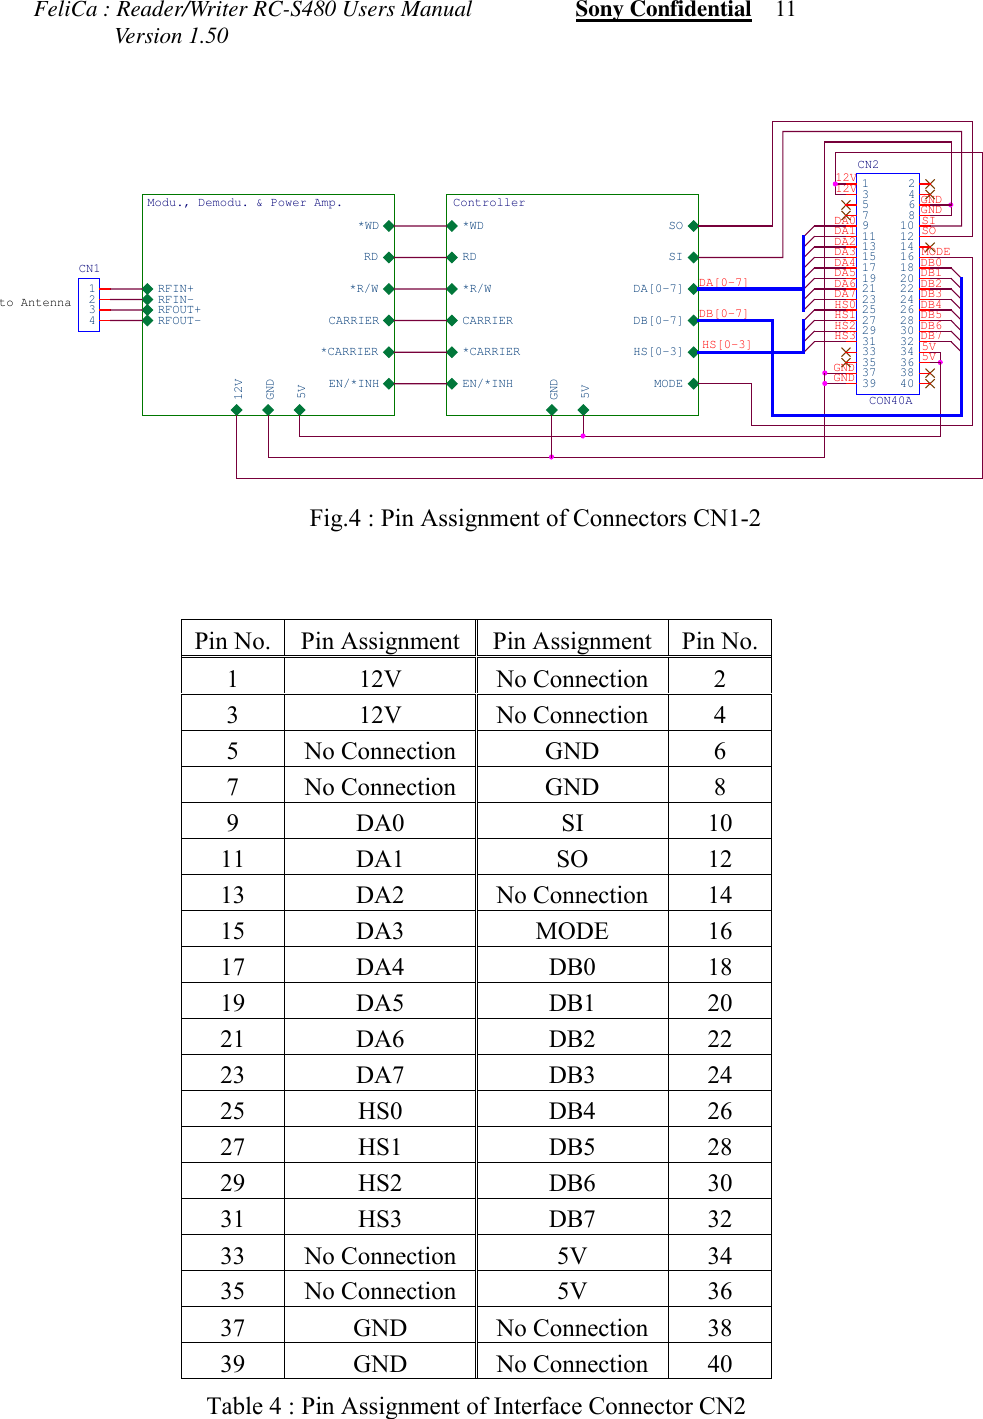 FeliCa : Reader/Writer RC-S480 Users Manual                  Sony Confidential    11              Version 1.50 Fig.4 : Pin Assignment of Connectors CN1-2Pin No. Pin Assignment Pin Assignment Pin No.1 12V No Connection 23 12V No Connection 45 No Connection GND 67 No Connection GND 89 DA0 SI 1011 DA1 SO 1213 DA2 No Connection 1415 DA3 MODE 1617 DA4 DB0 1819 DA5 DB1 2021 DA6 DB2 2223 DA7 DB3 2425 HS0 DB4 2627 HS1 DB5 2829 HS2 DB6 3031 HS3 DB7 3233 No Connection 5V 3435 No Connection 5V 3637 GND No Connection 3839 GND No Connection 40Table 4 : Pin Assignment of Interface Connector CN2Modu., Demodu. &amp; Power Amp.*R/WRD*WDGND5VCARRIER*CARRIER12VRFIN+RFIN-RFOUT+RFOUT-EN/*INHController*WD*R/WCARRIER*CARRIEREN/*INHRD SISOMODEDA[0-7]DB[0-7]HS[0-3]GND5Vto AntennaHS[0-3]DA[0-7]SI12VSO12VGNDGNDGNDHS0HS3HS1HS25V5VGNDDA3DA1DA0DA4DA6DA2DA7DA5MODEDB2DB4DB7DB[0-7]DB0DB3DB6DB1DB5CN11234CN2CON40A13579111315171921232527293133353739246810121416182022242628303234363840